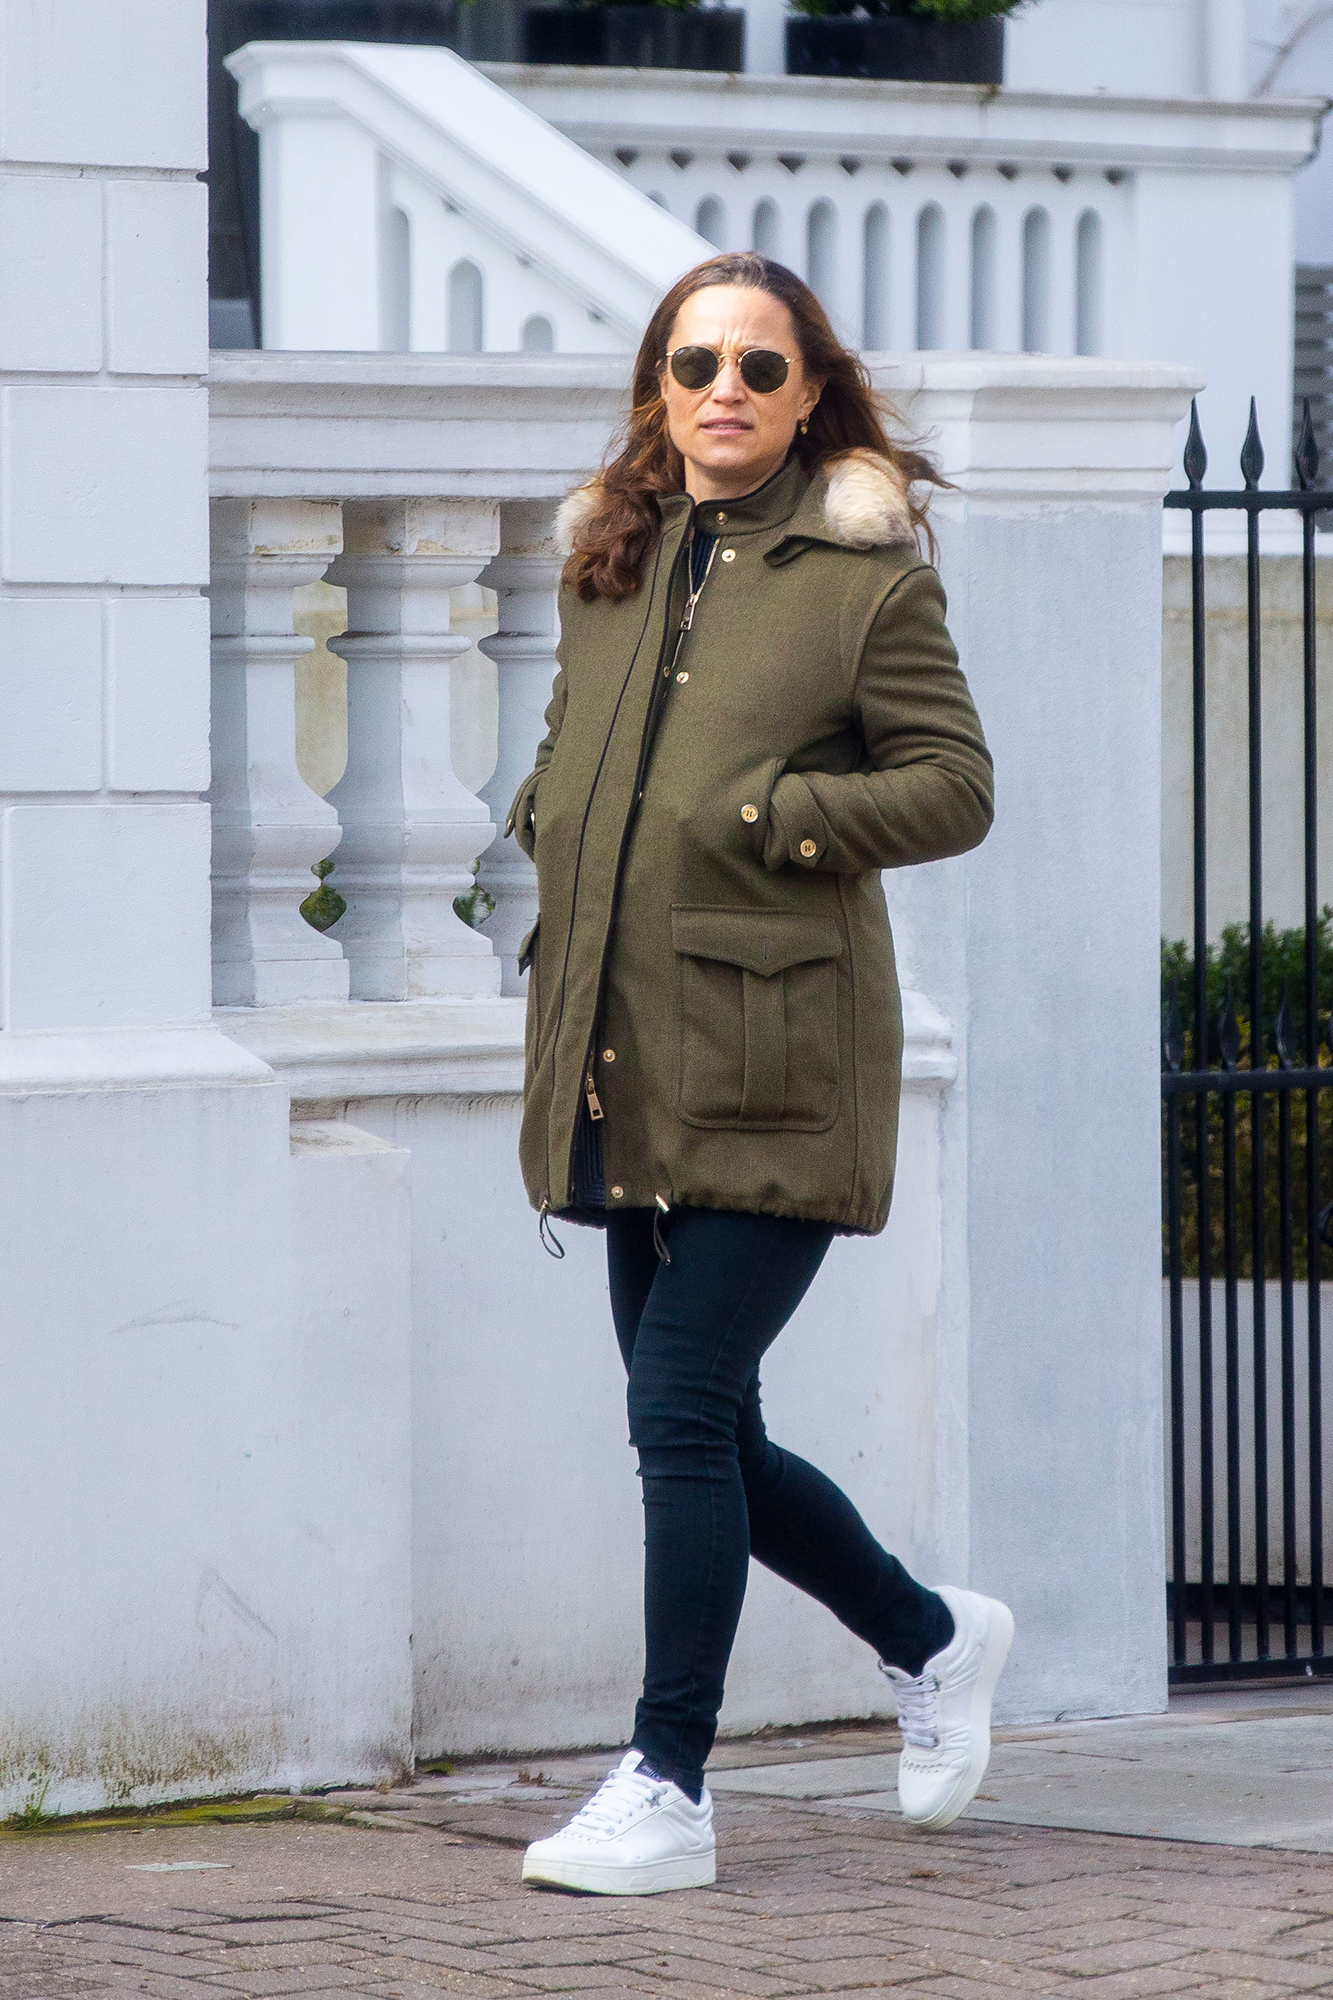 Pippa Middleton Steps Out With Her Baby Bump on Display After Mom Carole Middleton Confirms Pregnancy